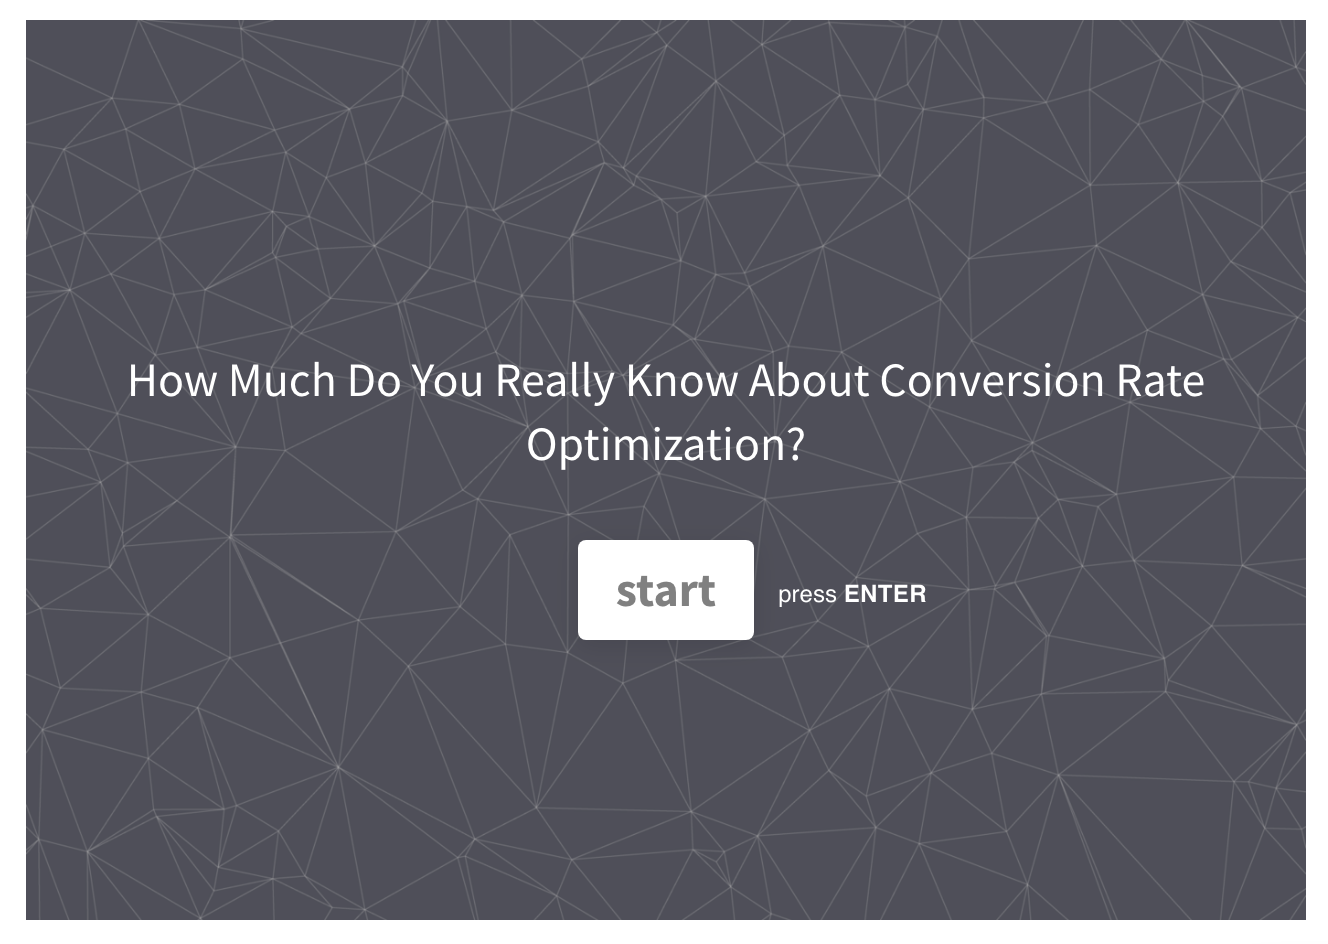 How much do you really know about conversion rate optimization image to attract visitors to click